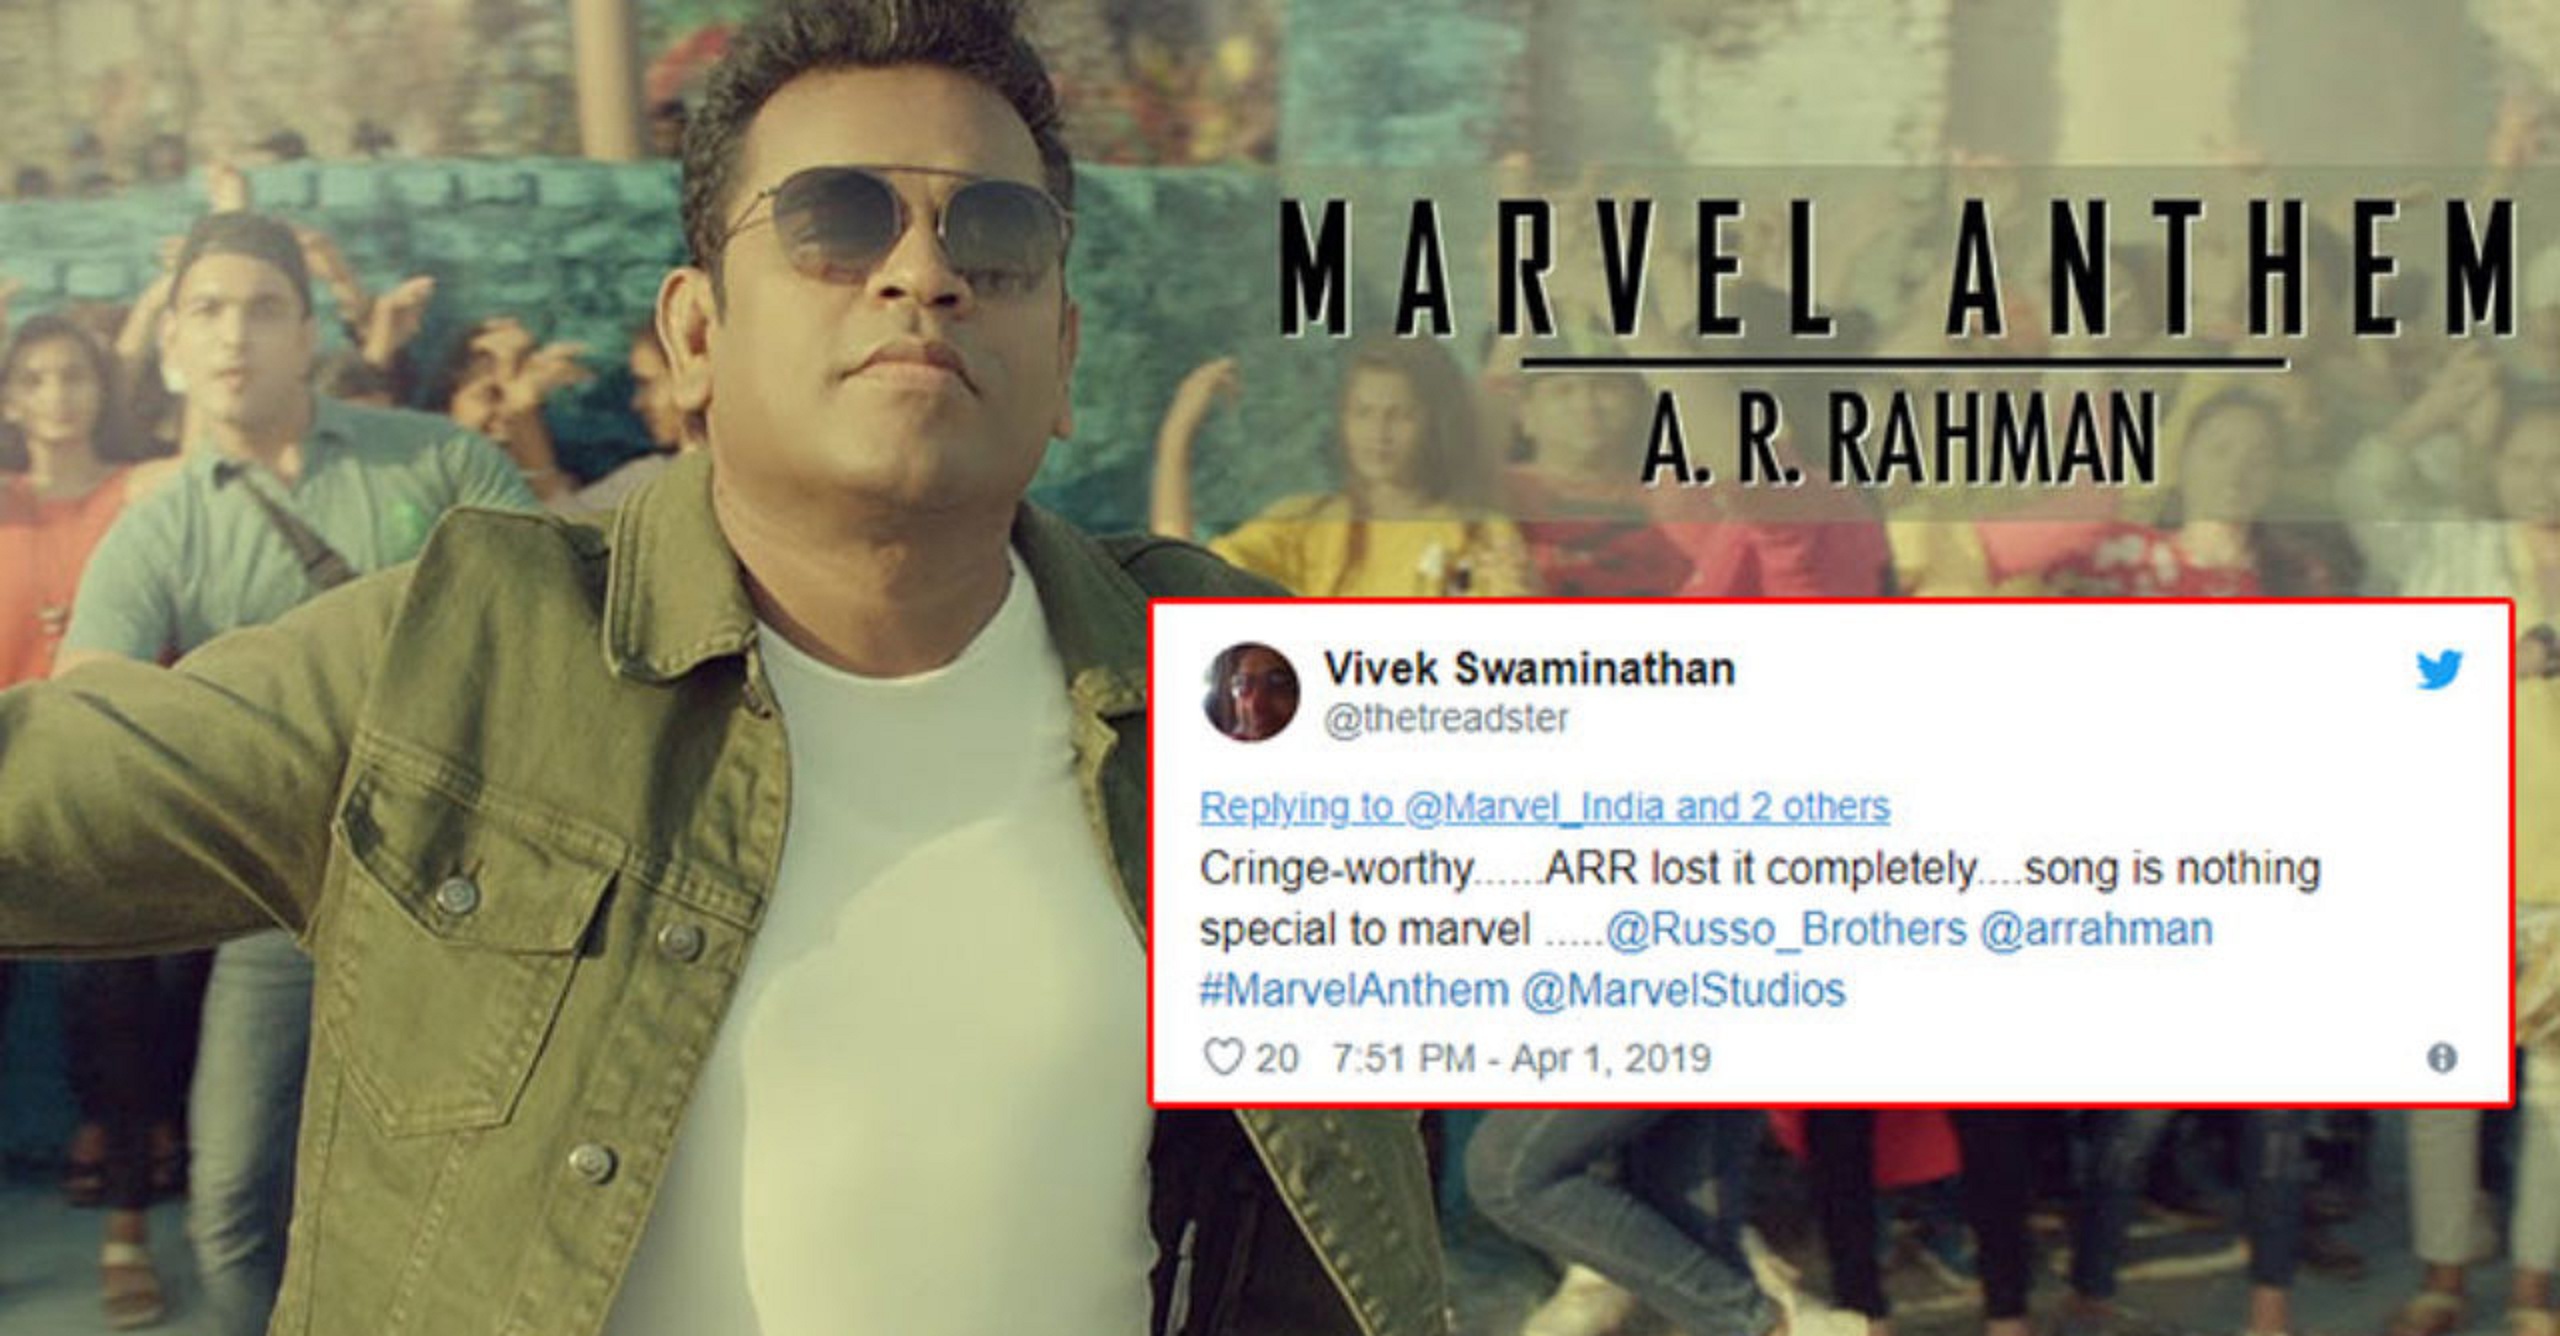 AR Rahman’s Theme-Song For Avengers: Endgame Faces Ridicule For Being a ‘Disappointment’